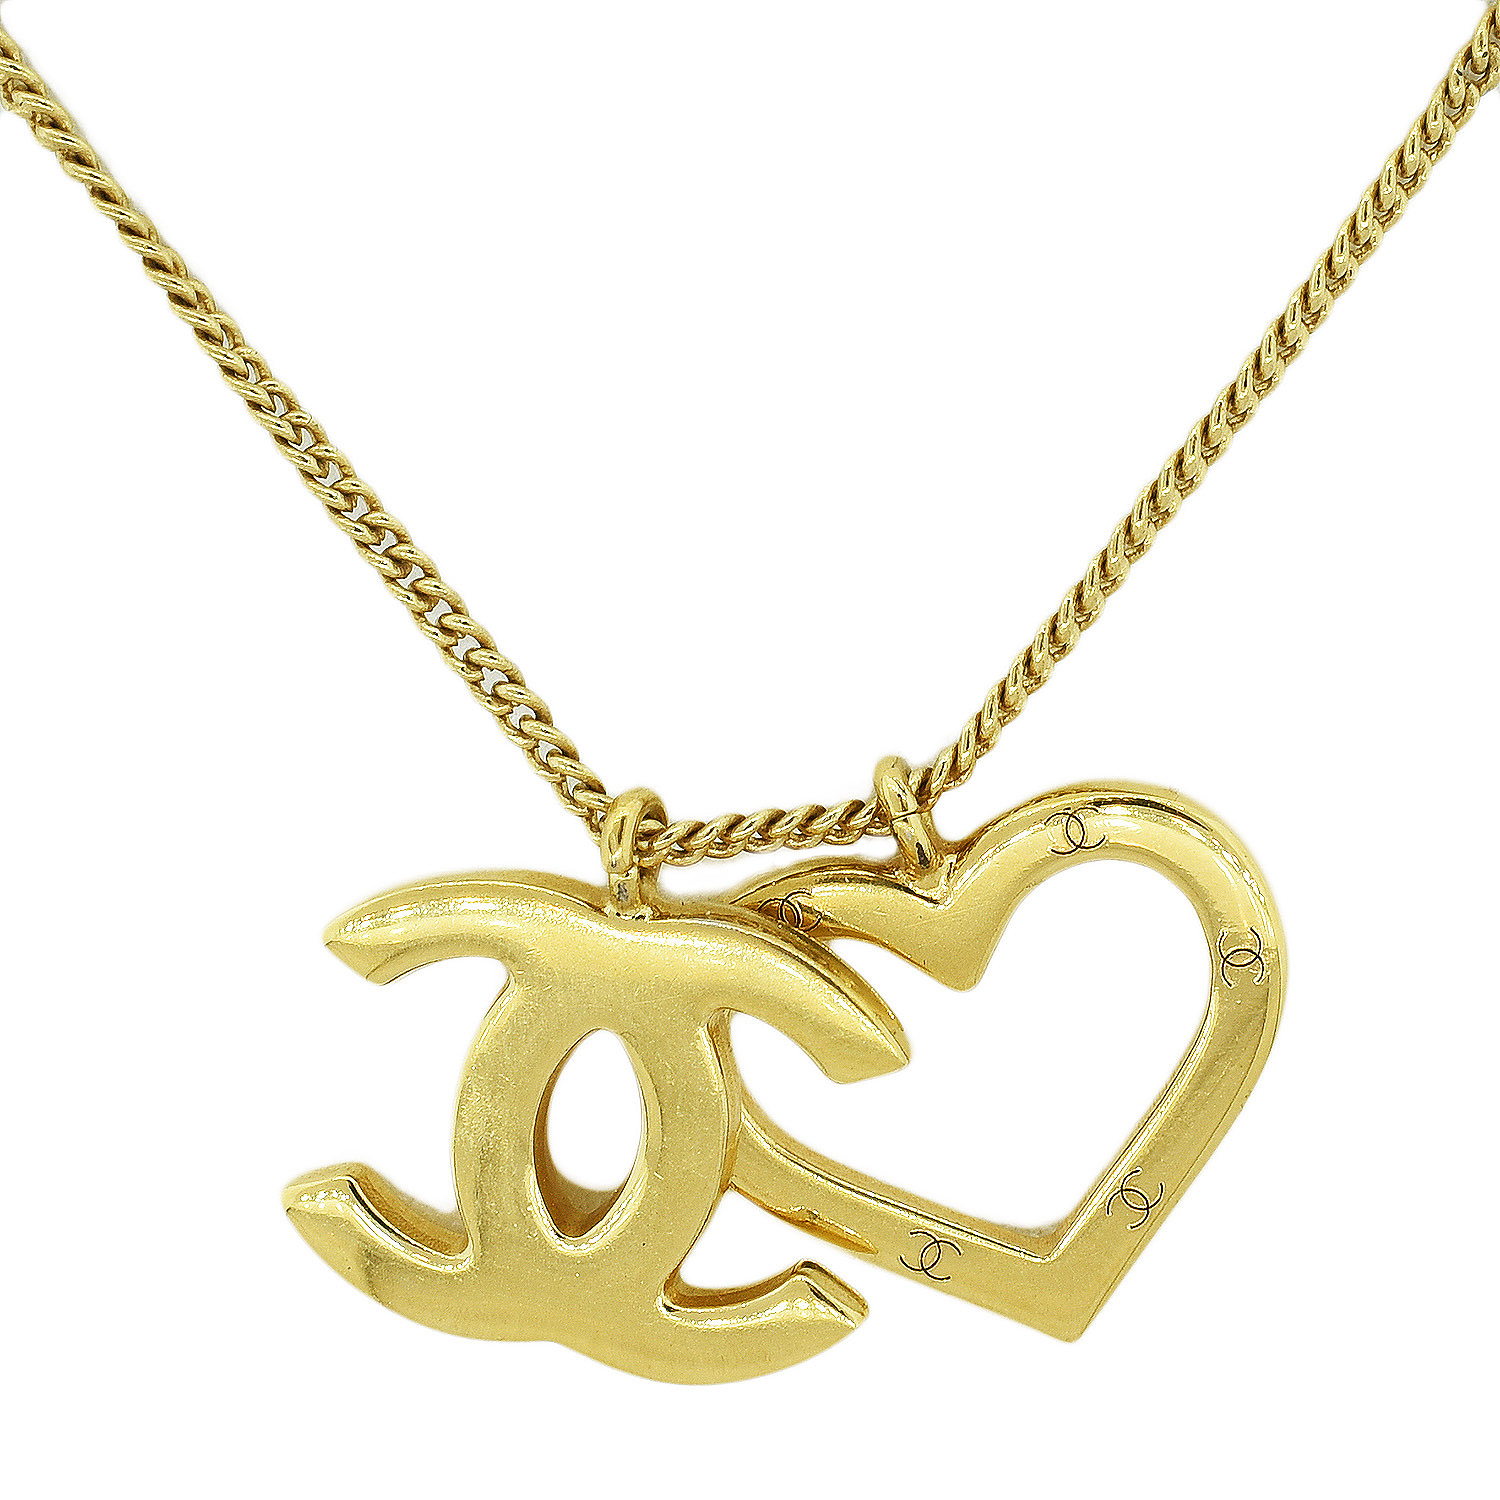 Gold Chanel CC and Heart Pendant Gold Necklace, Chanel